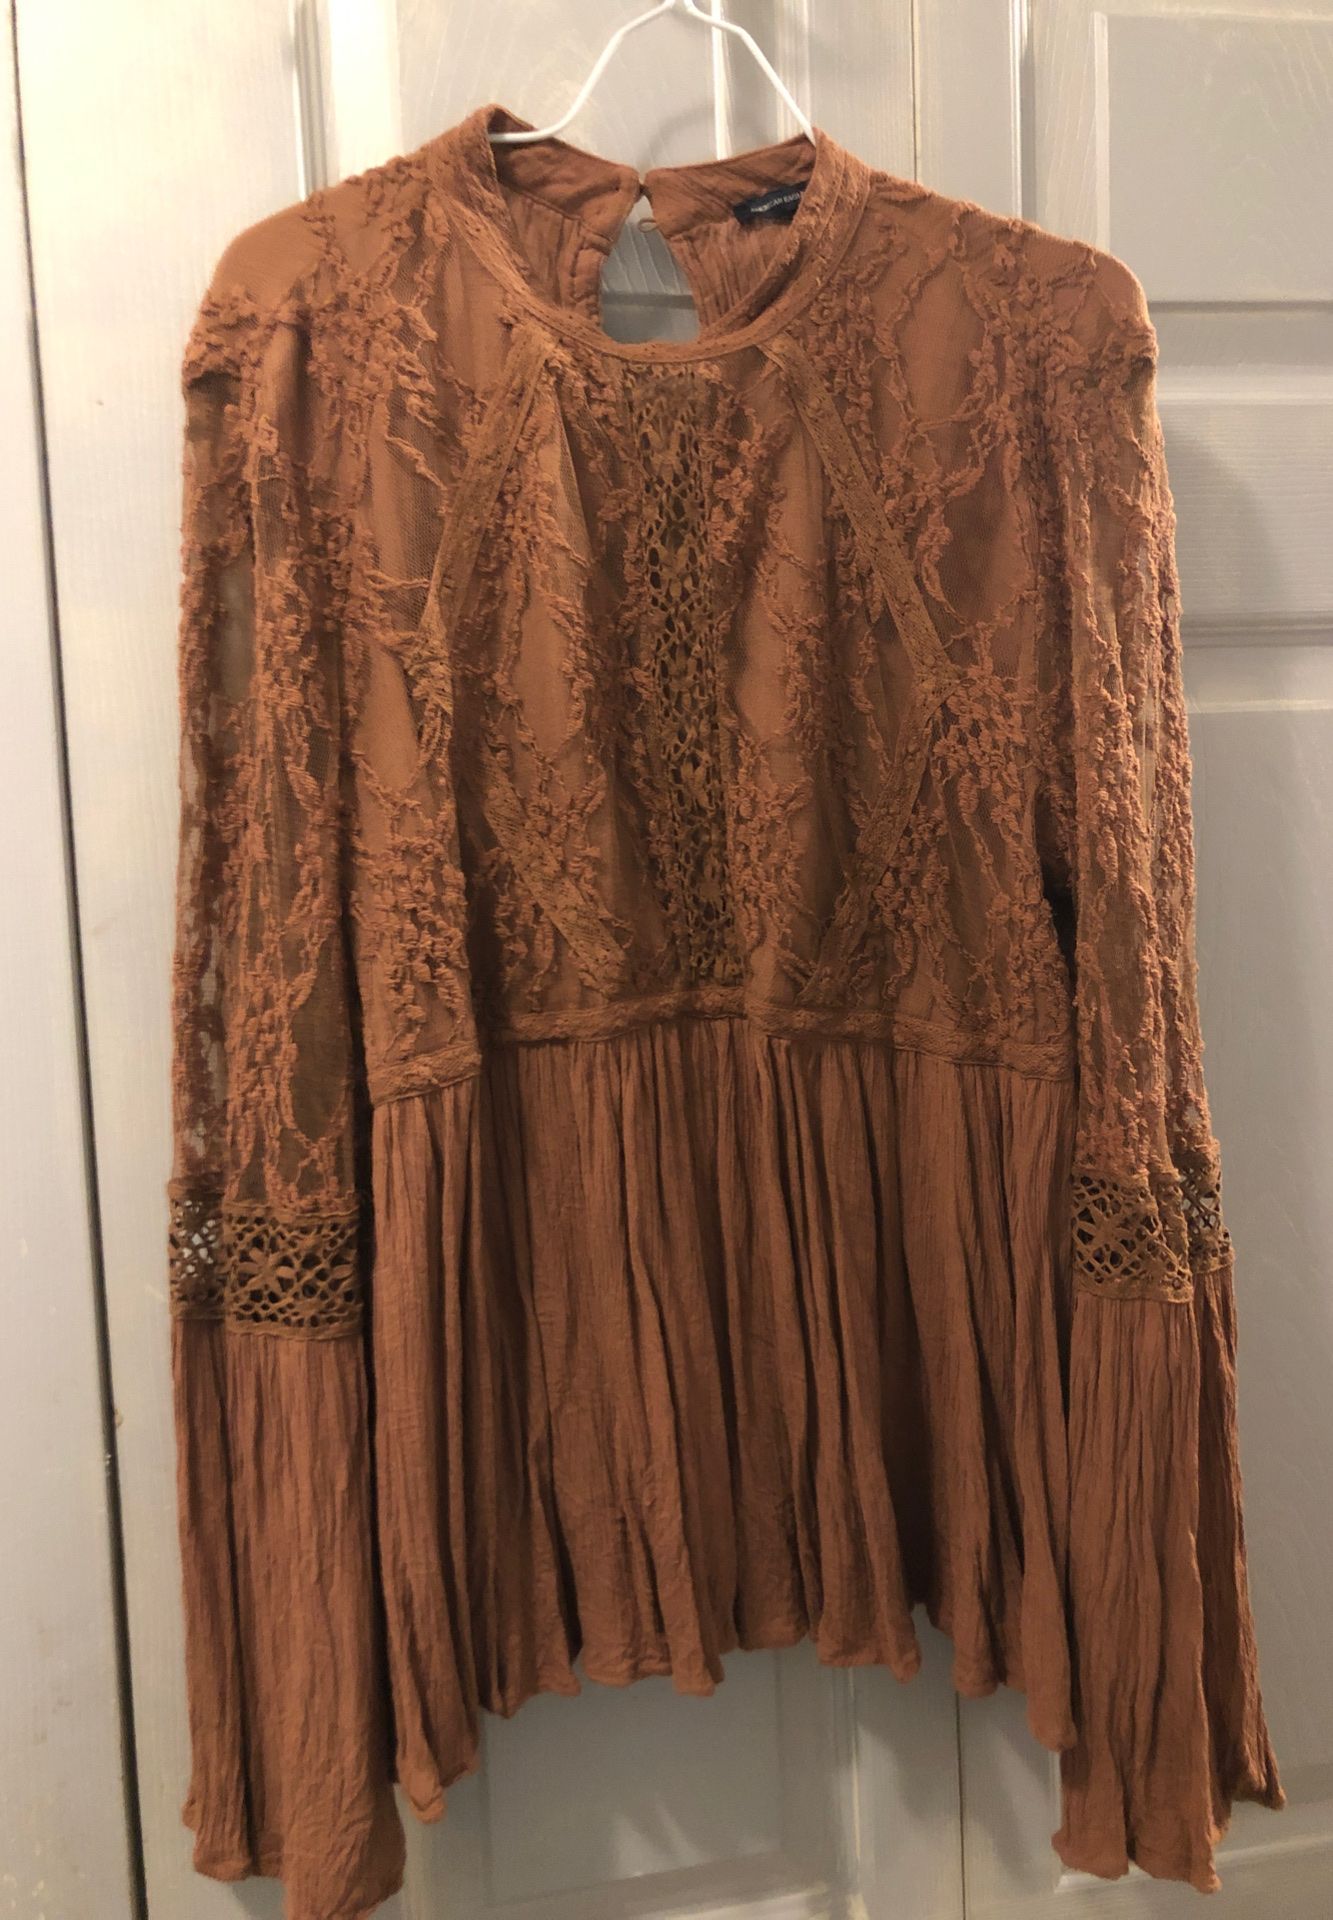 New American Eagle 🦅 designer 👩‍🎨 exquisite lace & flow doll blouse shirt top Large